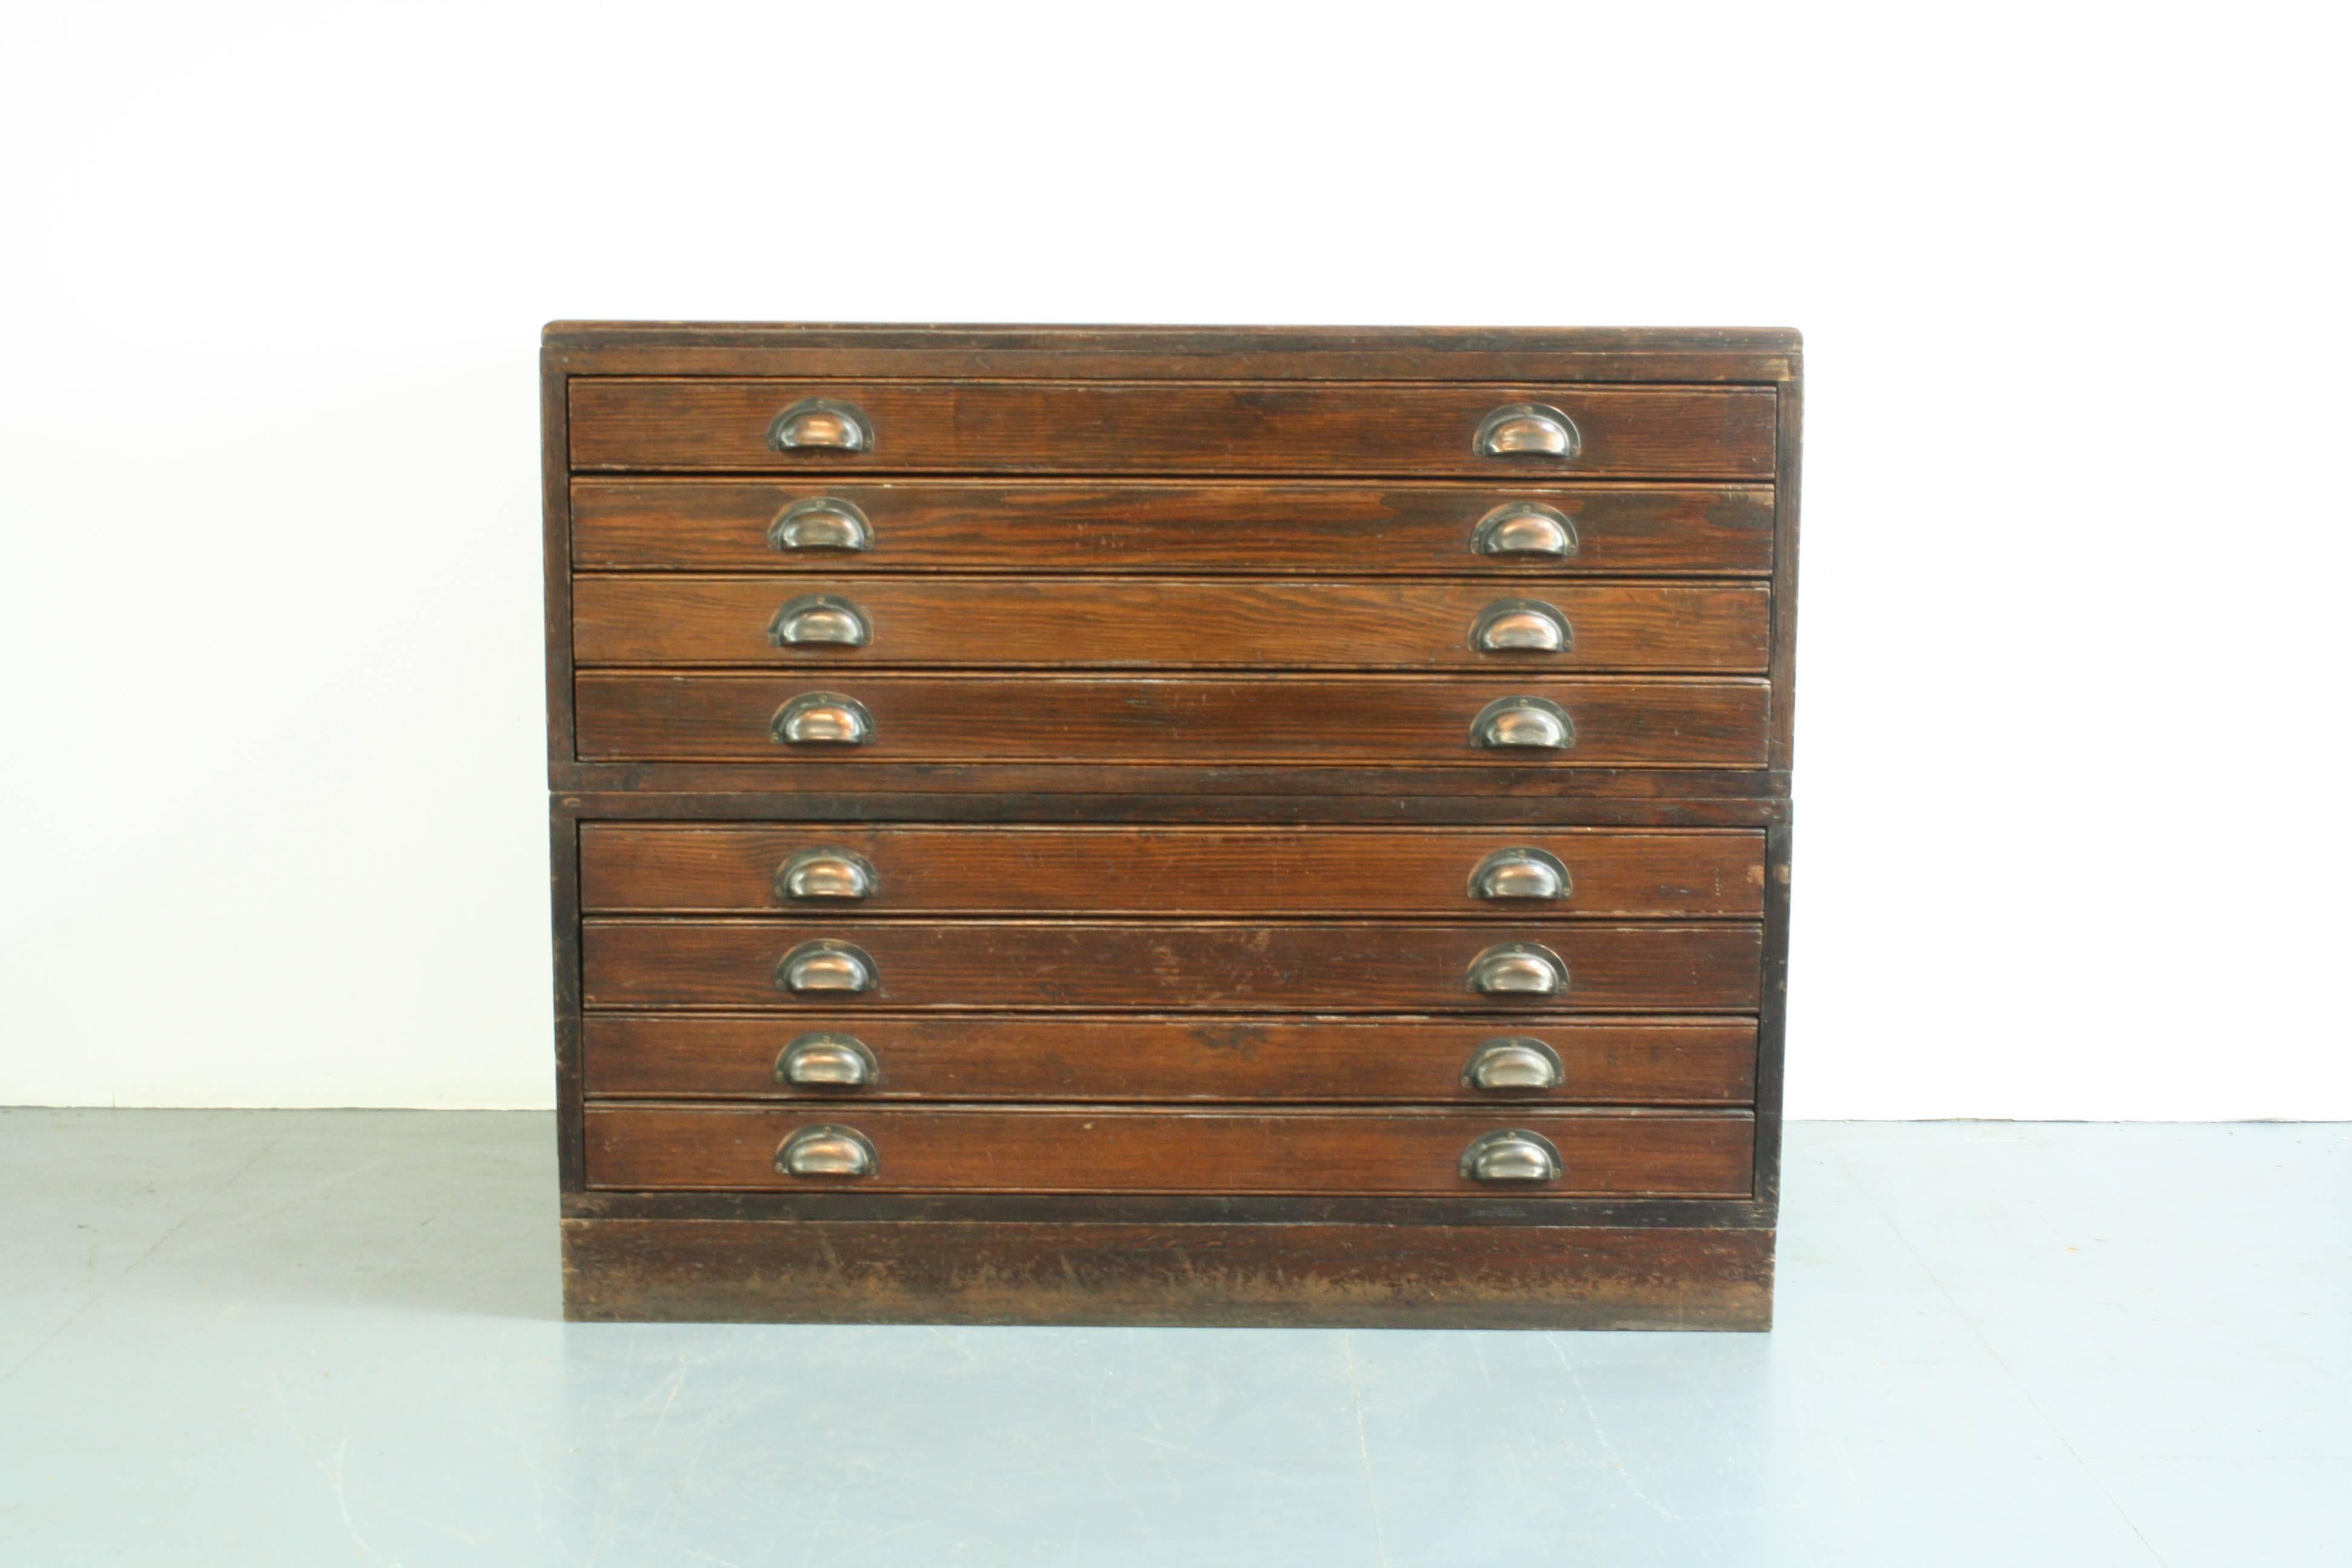 A very fine eight-drawer vintage plan chest with panelled sides and brass cup handles. 

The plan chest has eight full sized aluminium lined drawers, so it is suitable for archival use.

Approximate dimensions: 

Height 94cm

Width